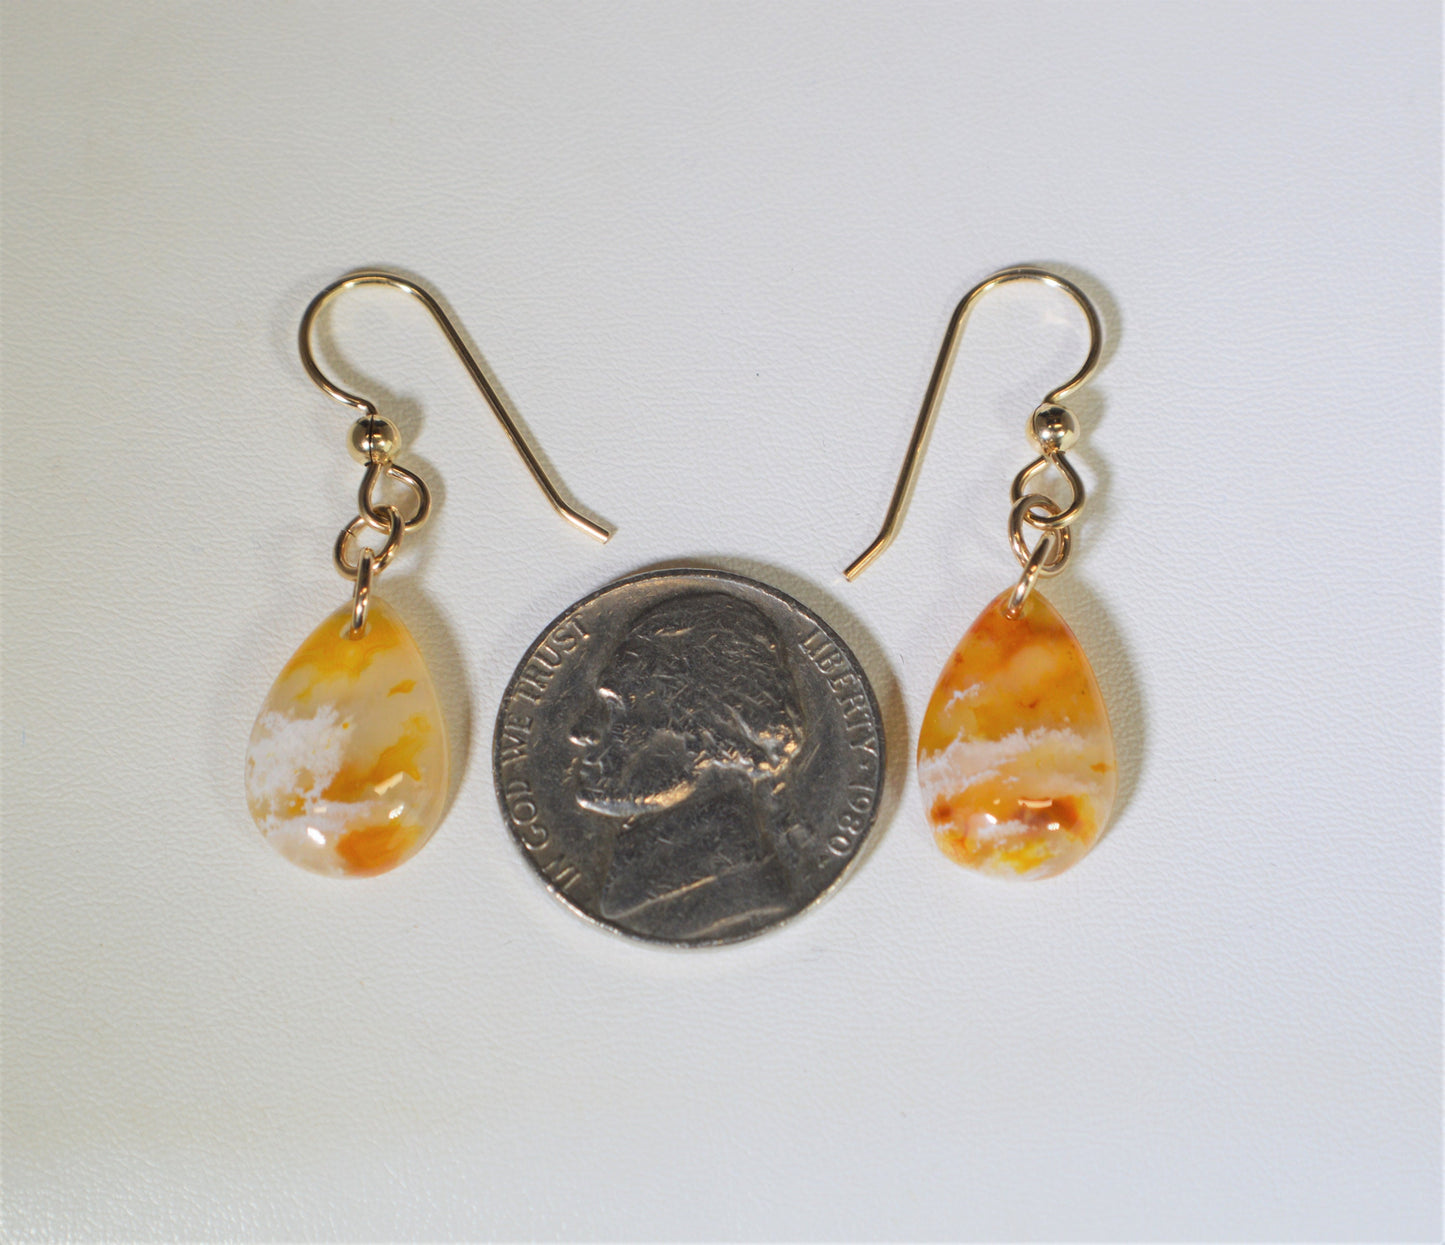 Agate Earring, Gold Filled Ear Wires, Oregon Yellow Plume Agate Earrings, Rare Agate Earring, Beautiful Color